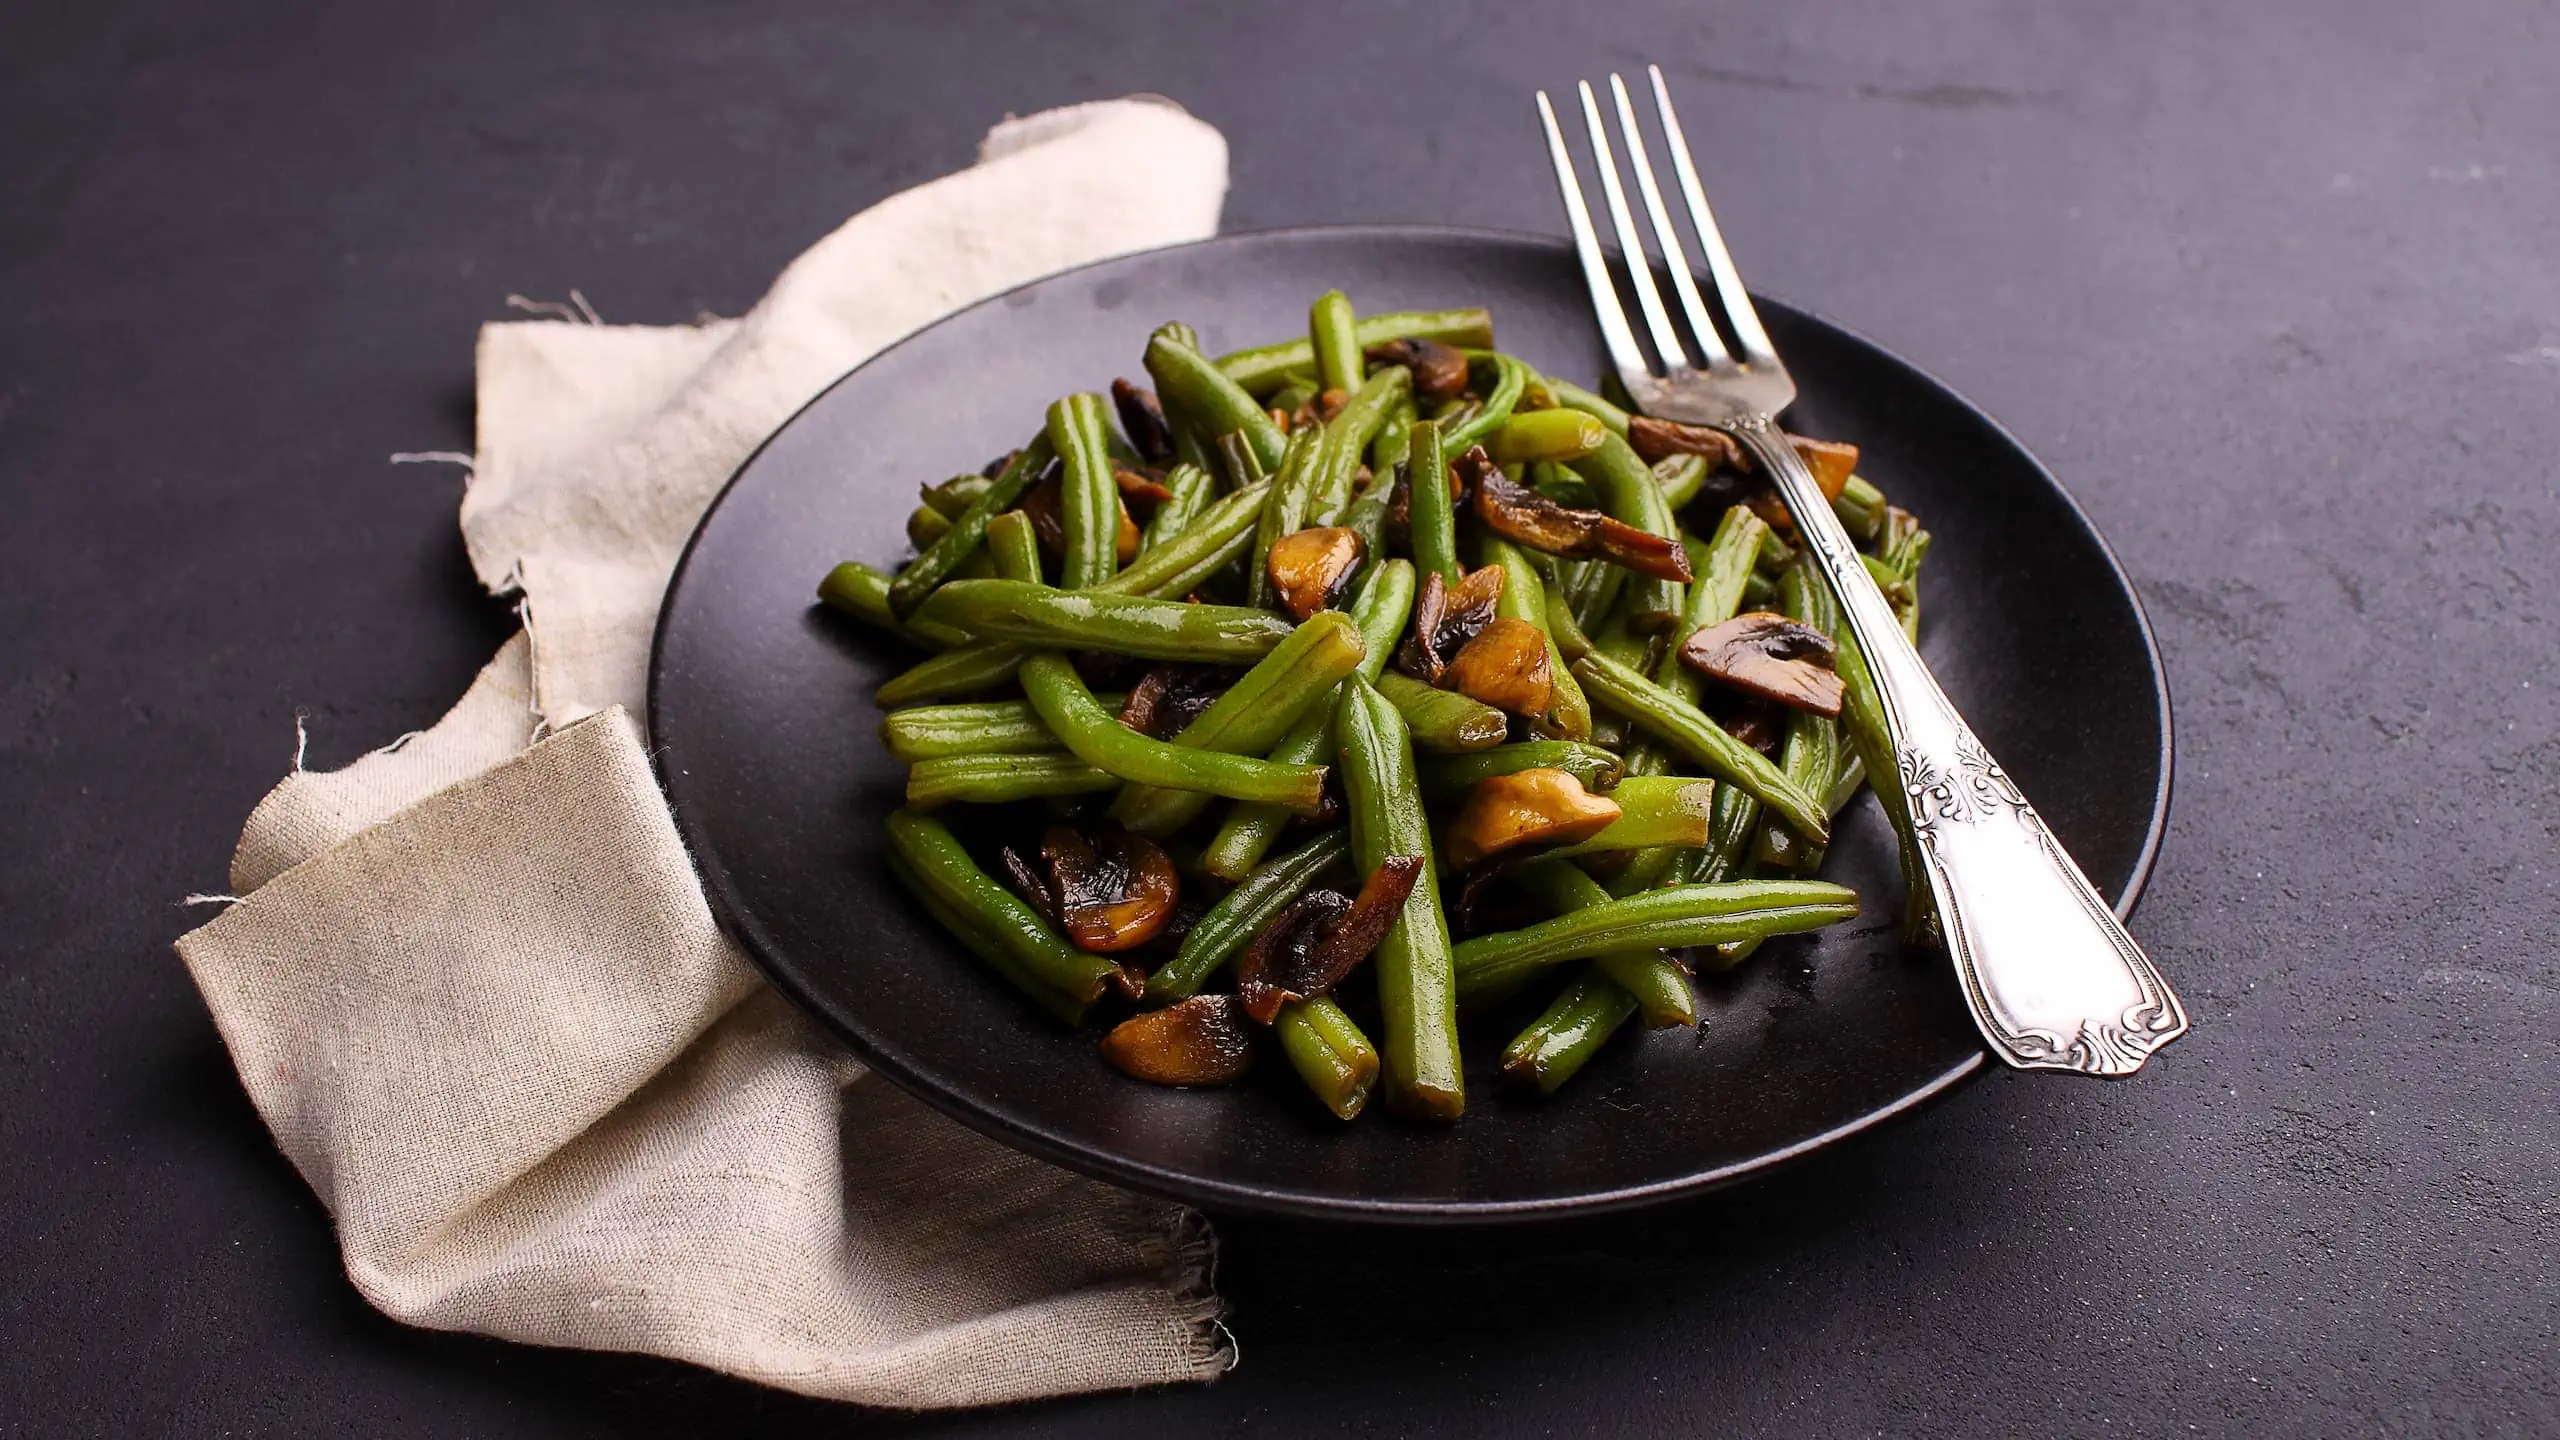 Our version of crack green beans recipe